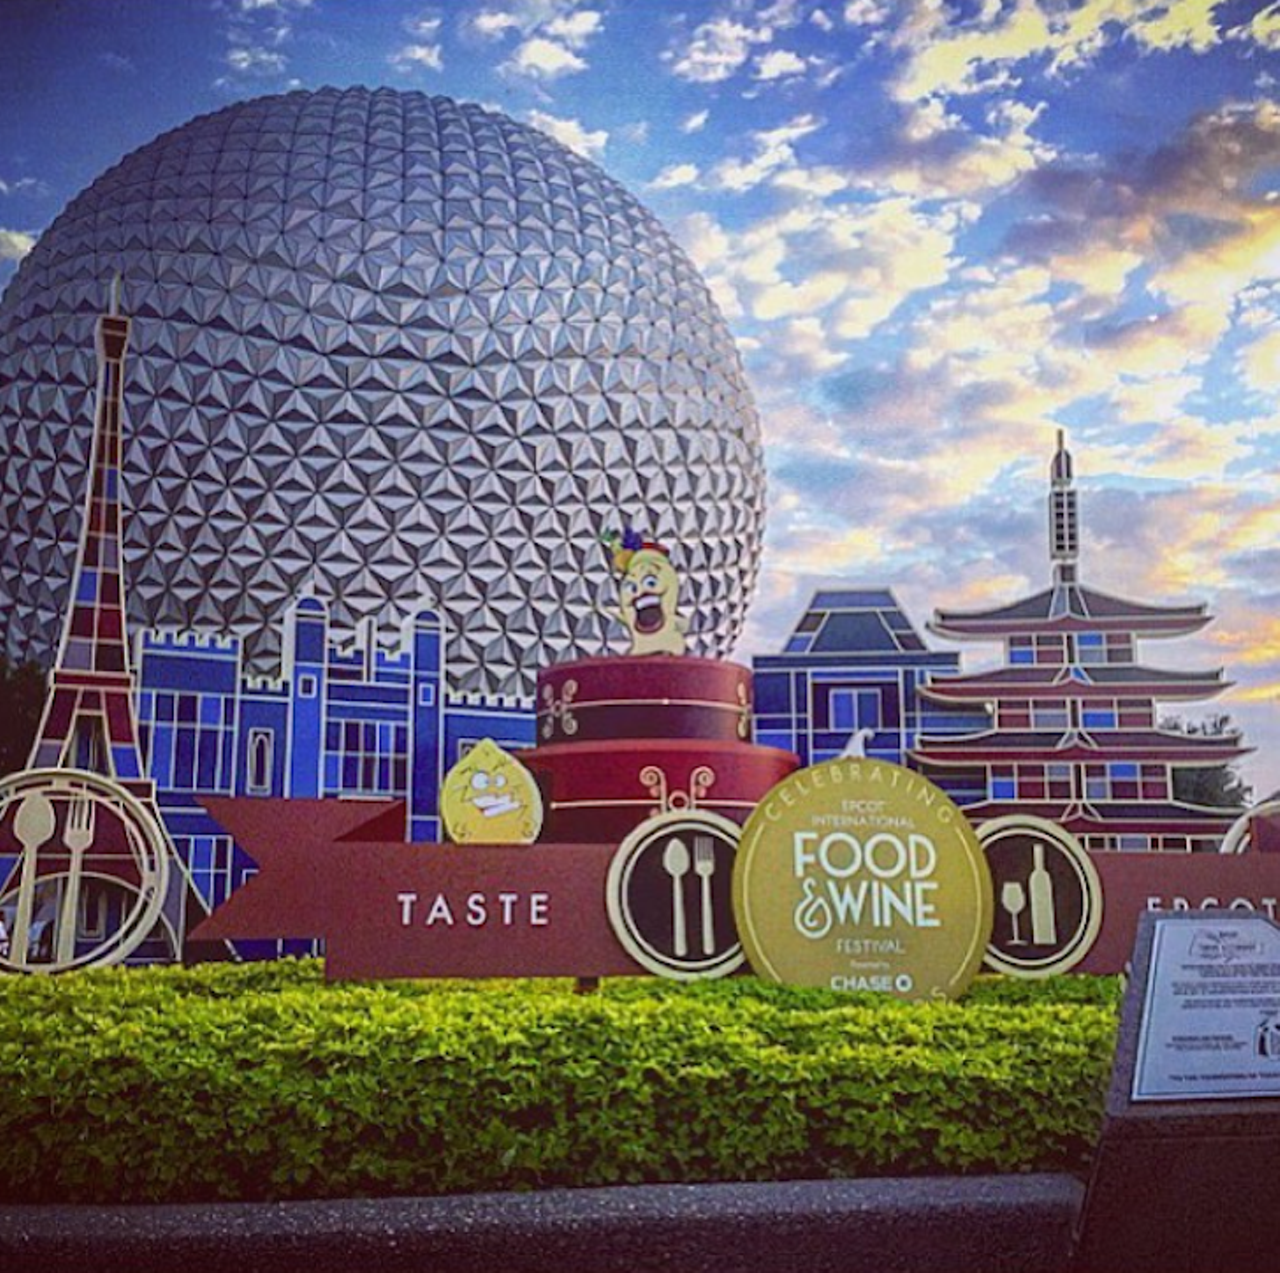 Epcot International Food And Wine Festival
Sept. 14-Nov. 14, Epcot,  200 Epcot Center Drive, 407-939-5277
Epcot&#146;s &#147;eating and drinking around the world&#148; festival enters its 21st year of allowing park goers to sample cuisine and alcoholic drinks from over 20 countries. Park admission required. 
Photo via riscompany/Instagram